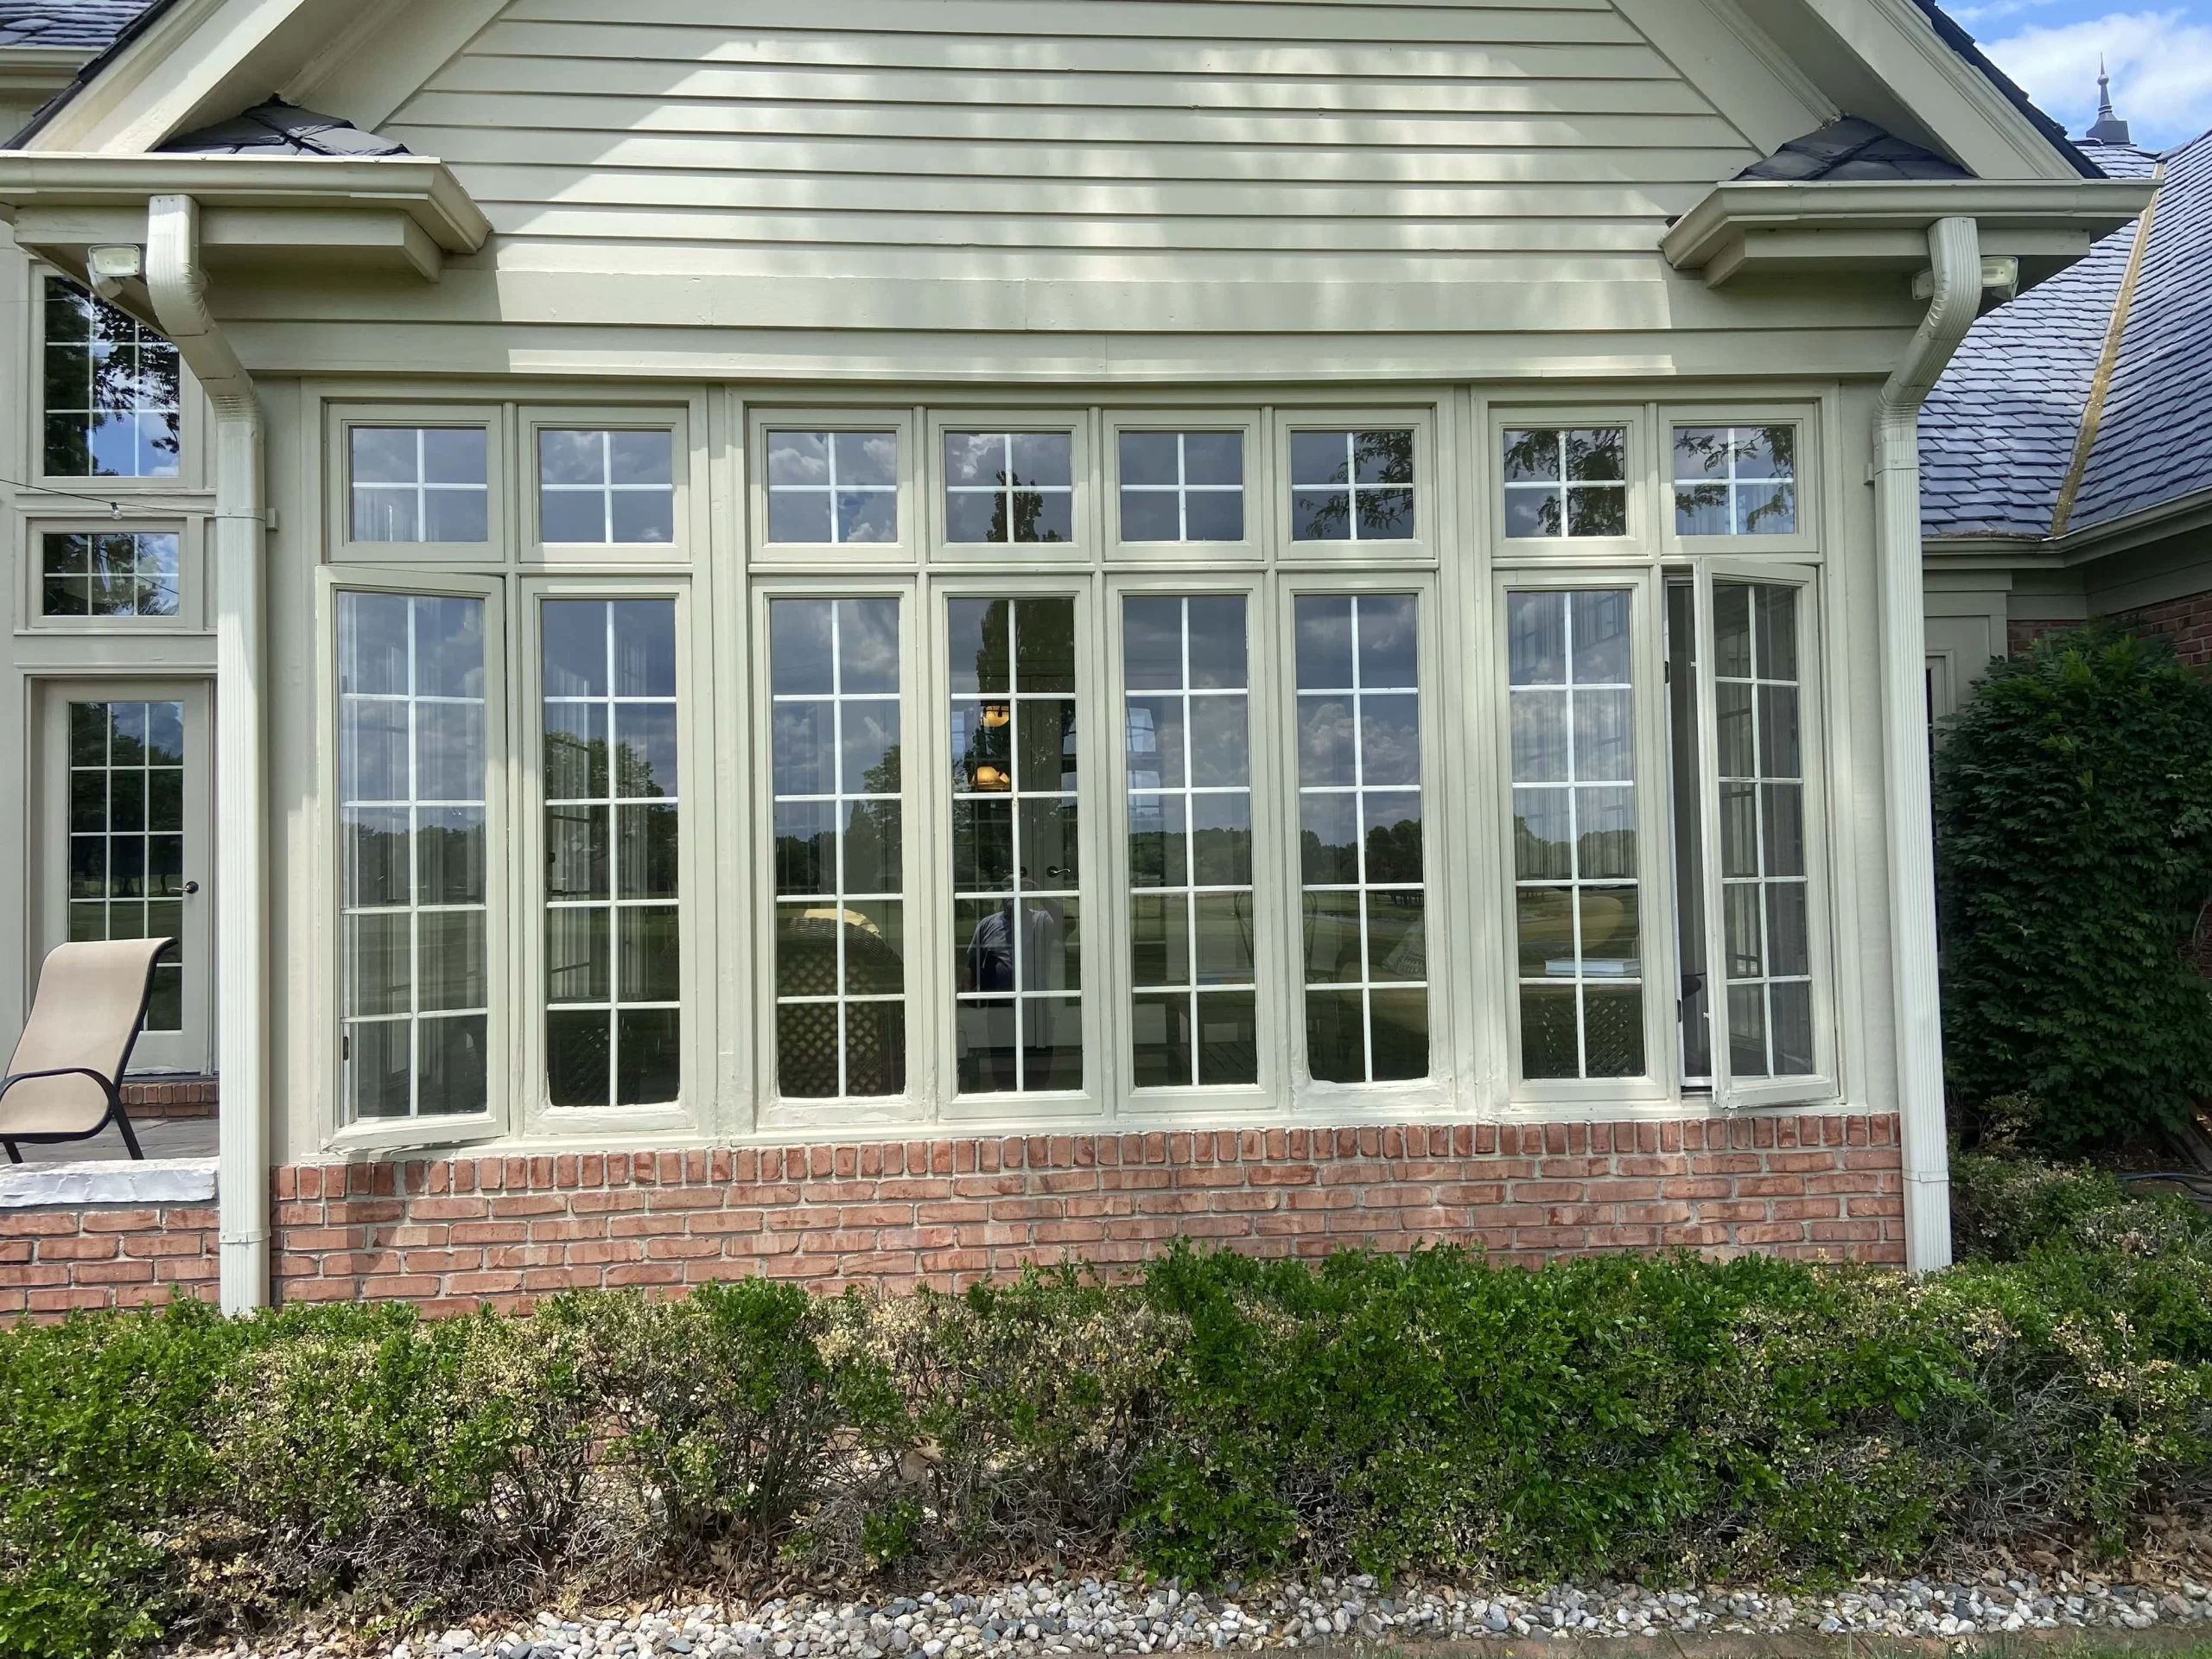 Rotten Wood Window Frame Repair and Restoration in Tinley Park, IL